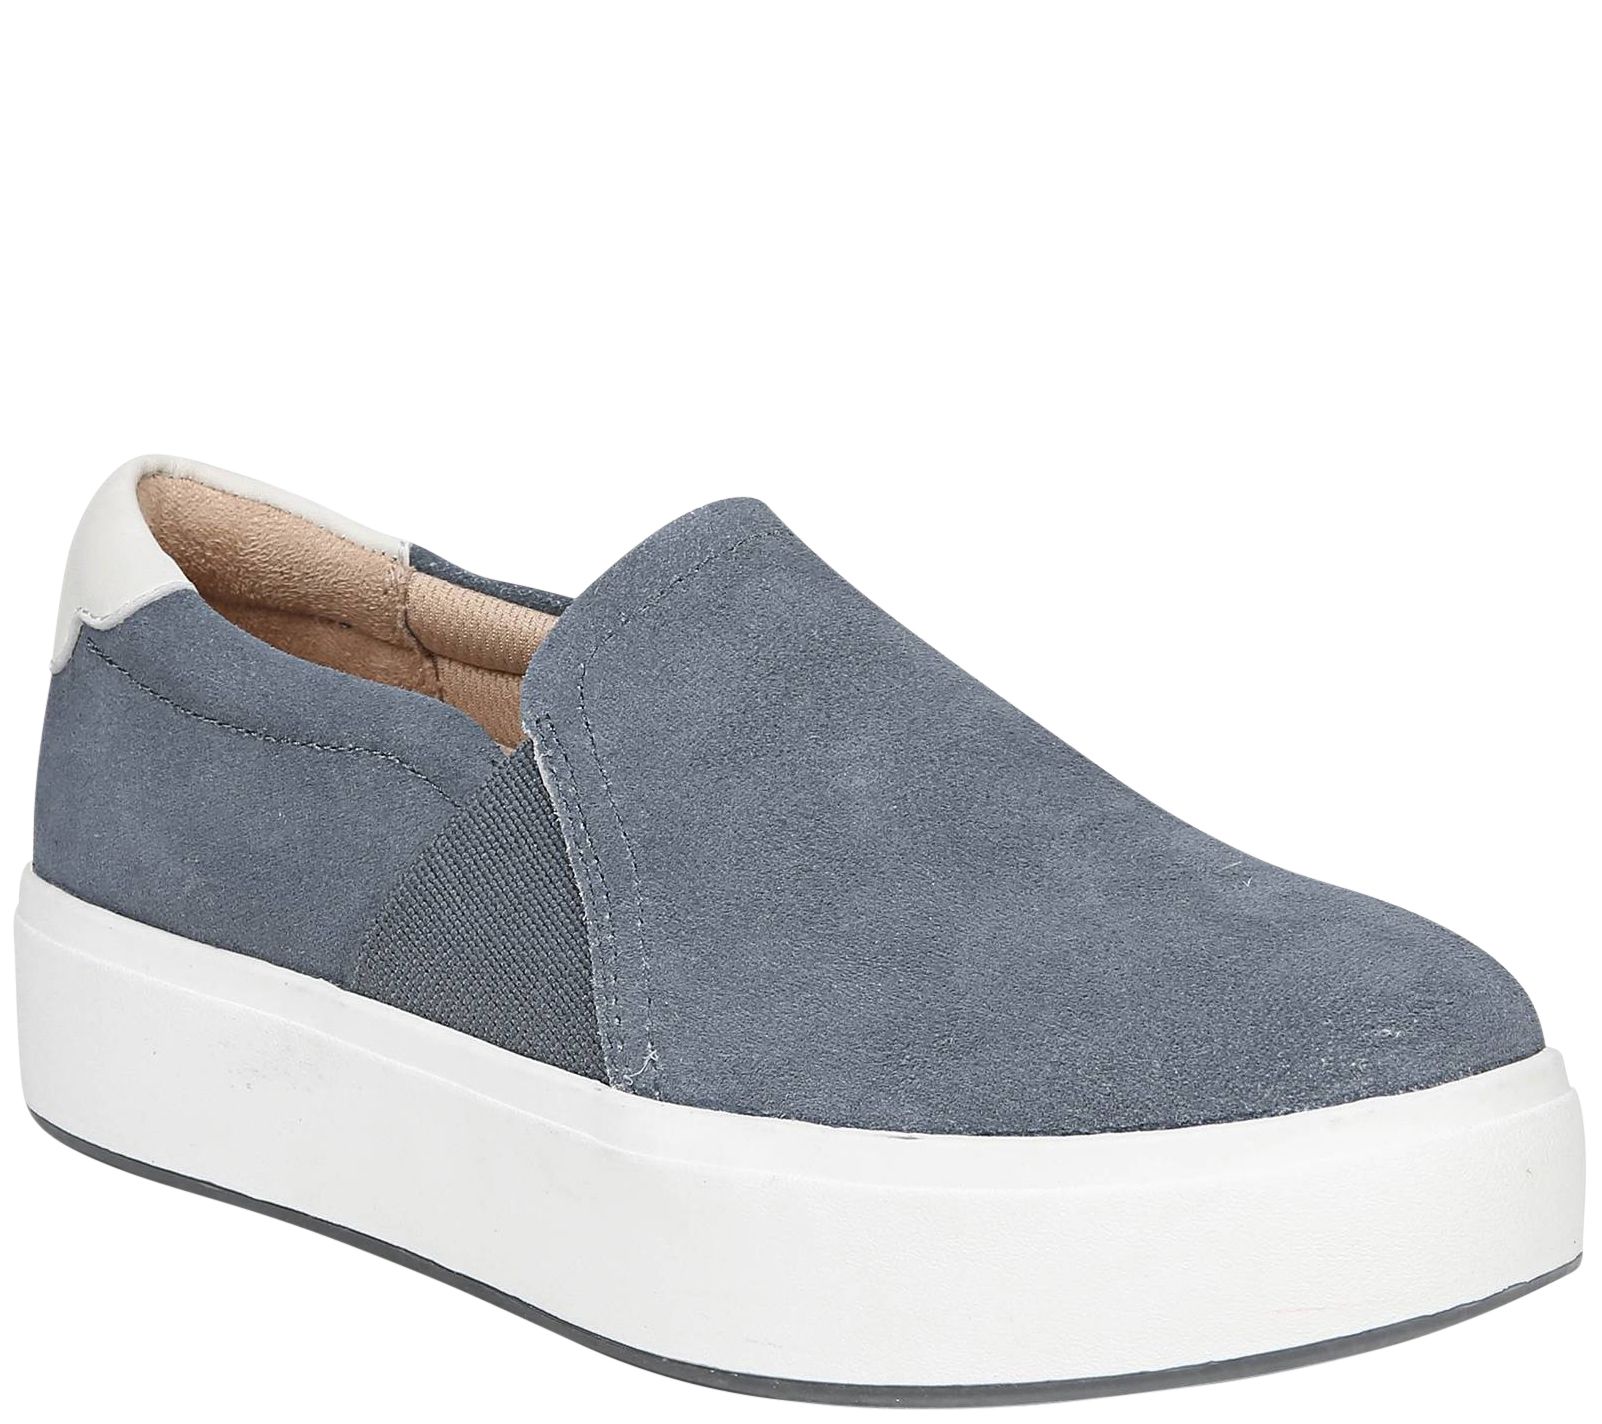 Dr. Scholl's Sporty Suede Slip-On 